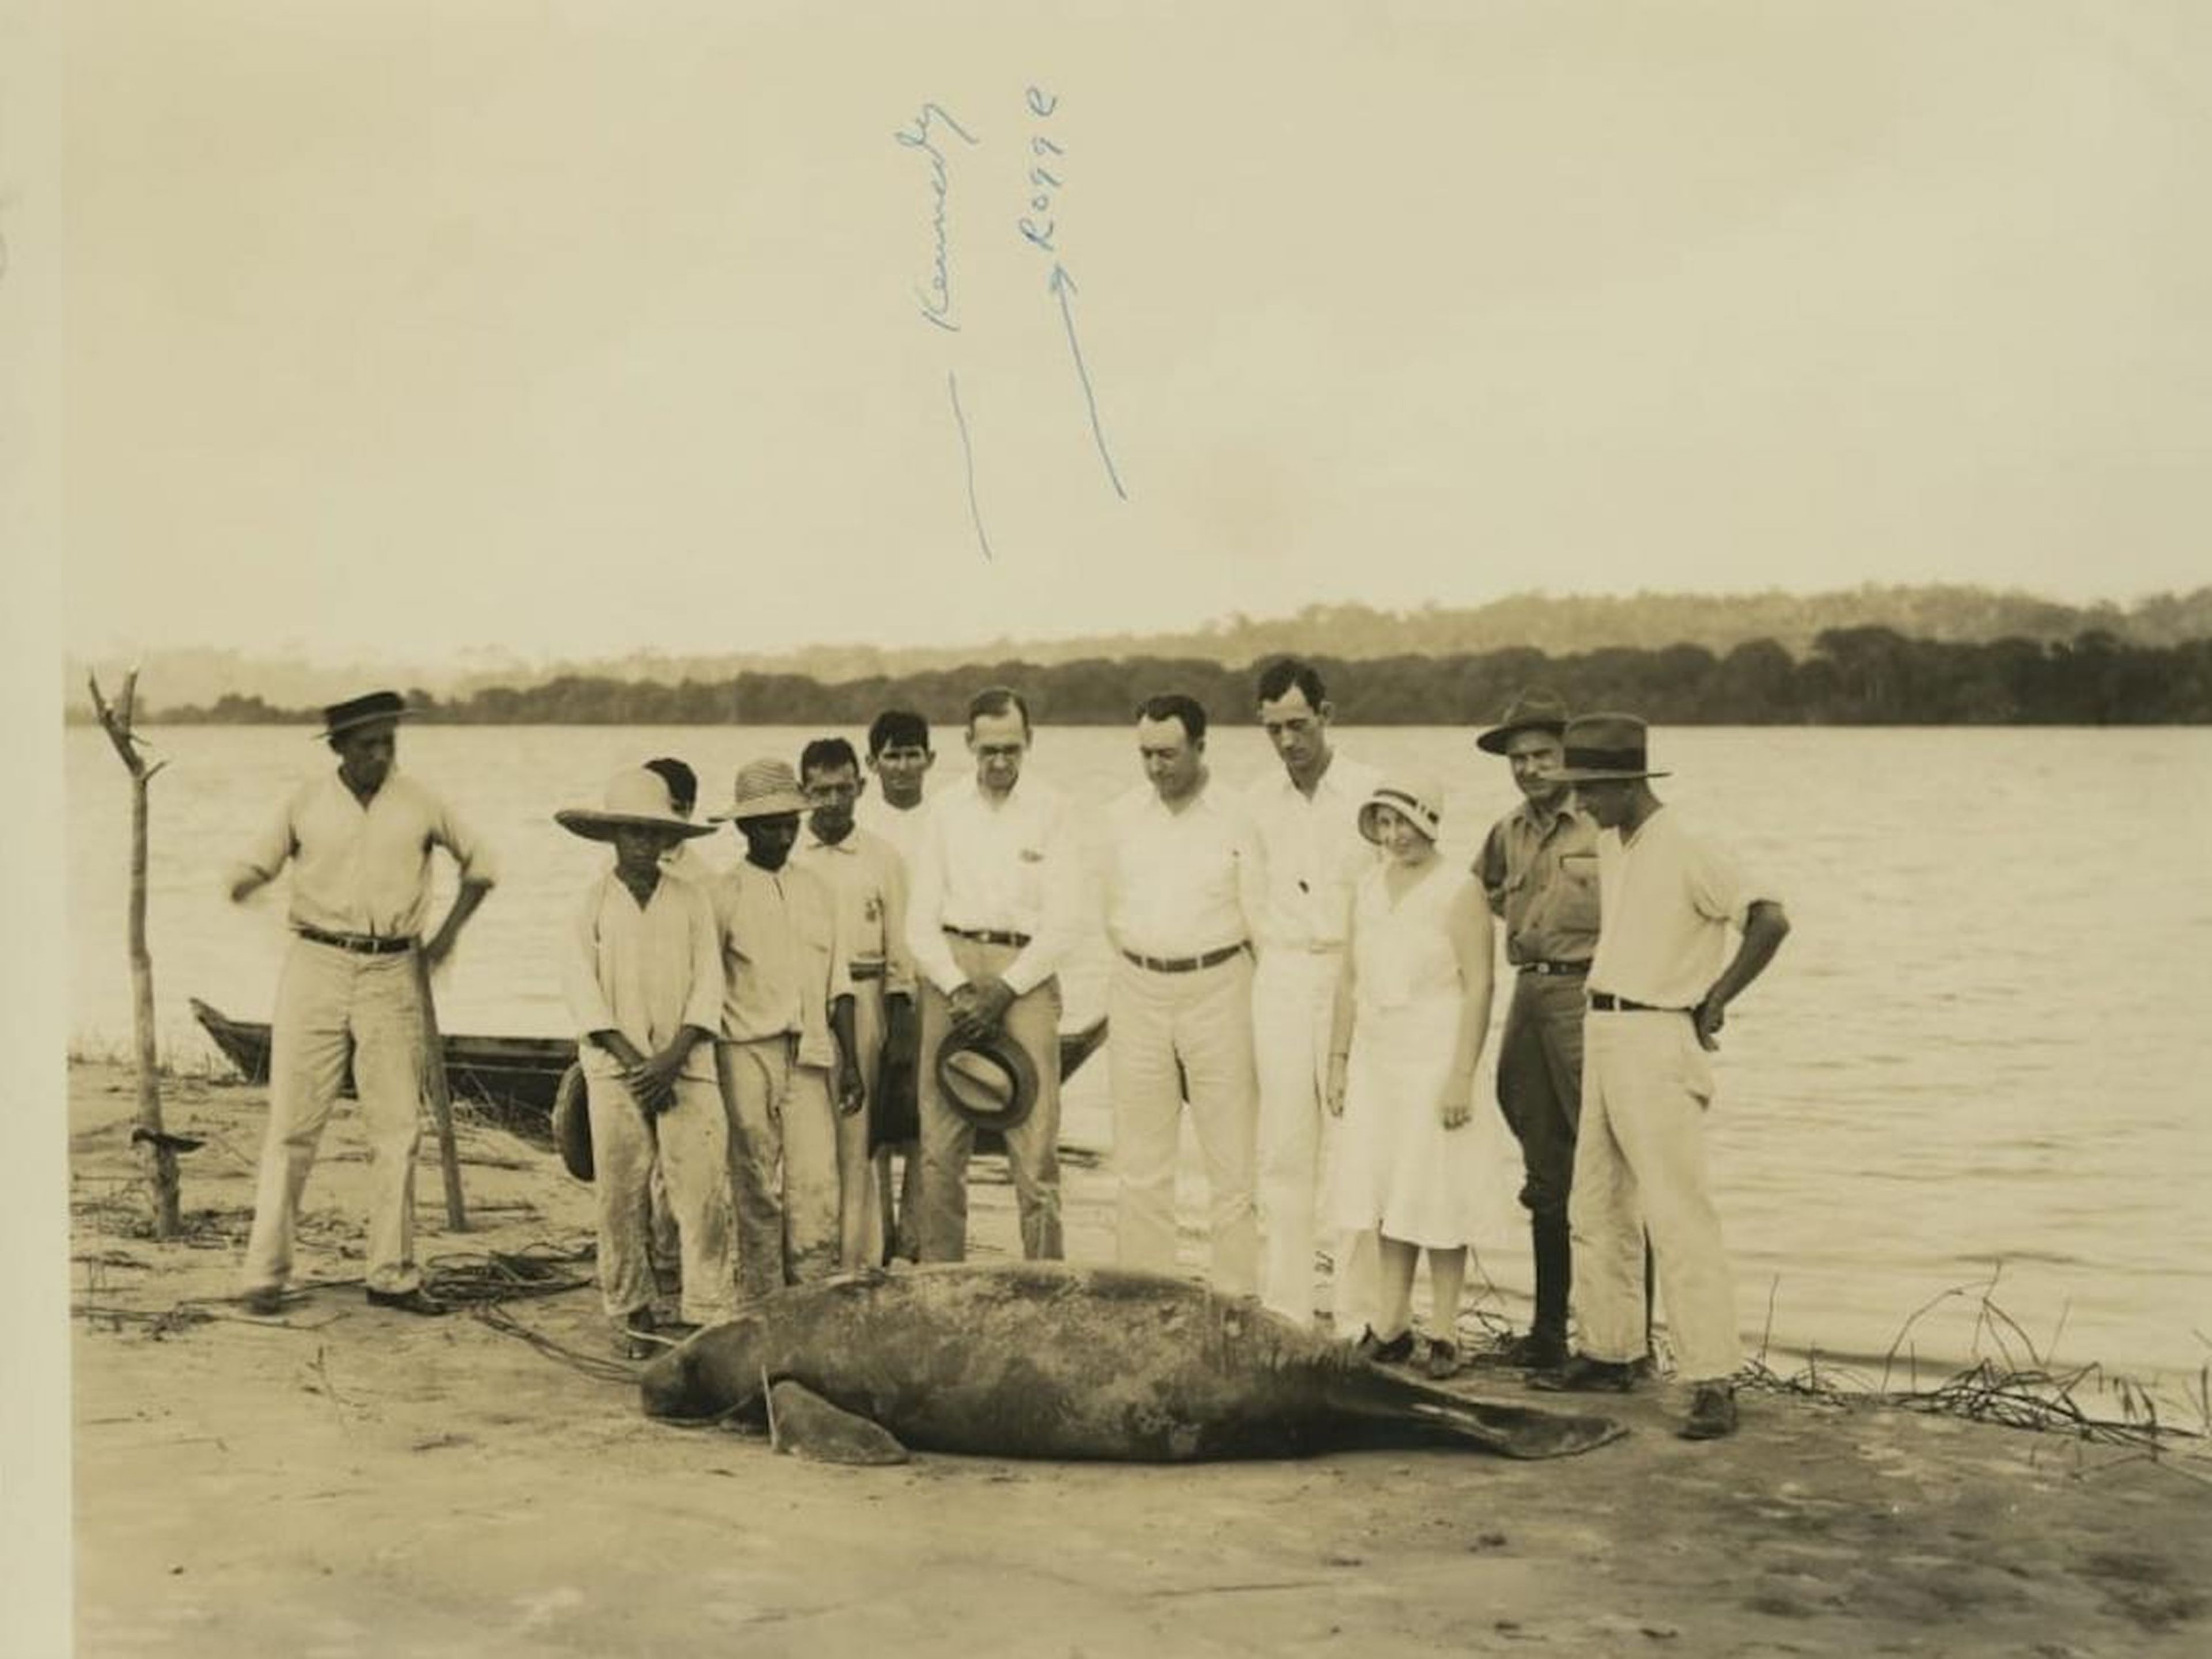 Fordlandia managers and workers standing over a sea cow, or manatee, that washed up on shore.